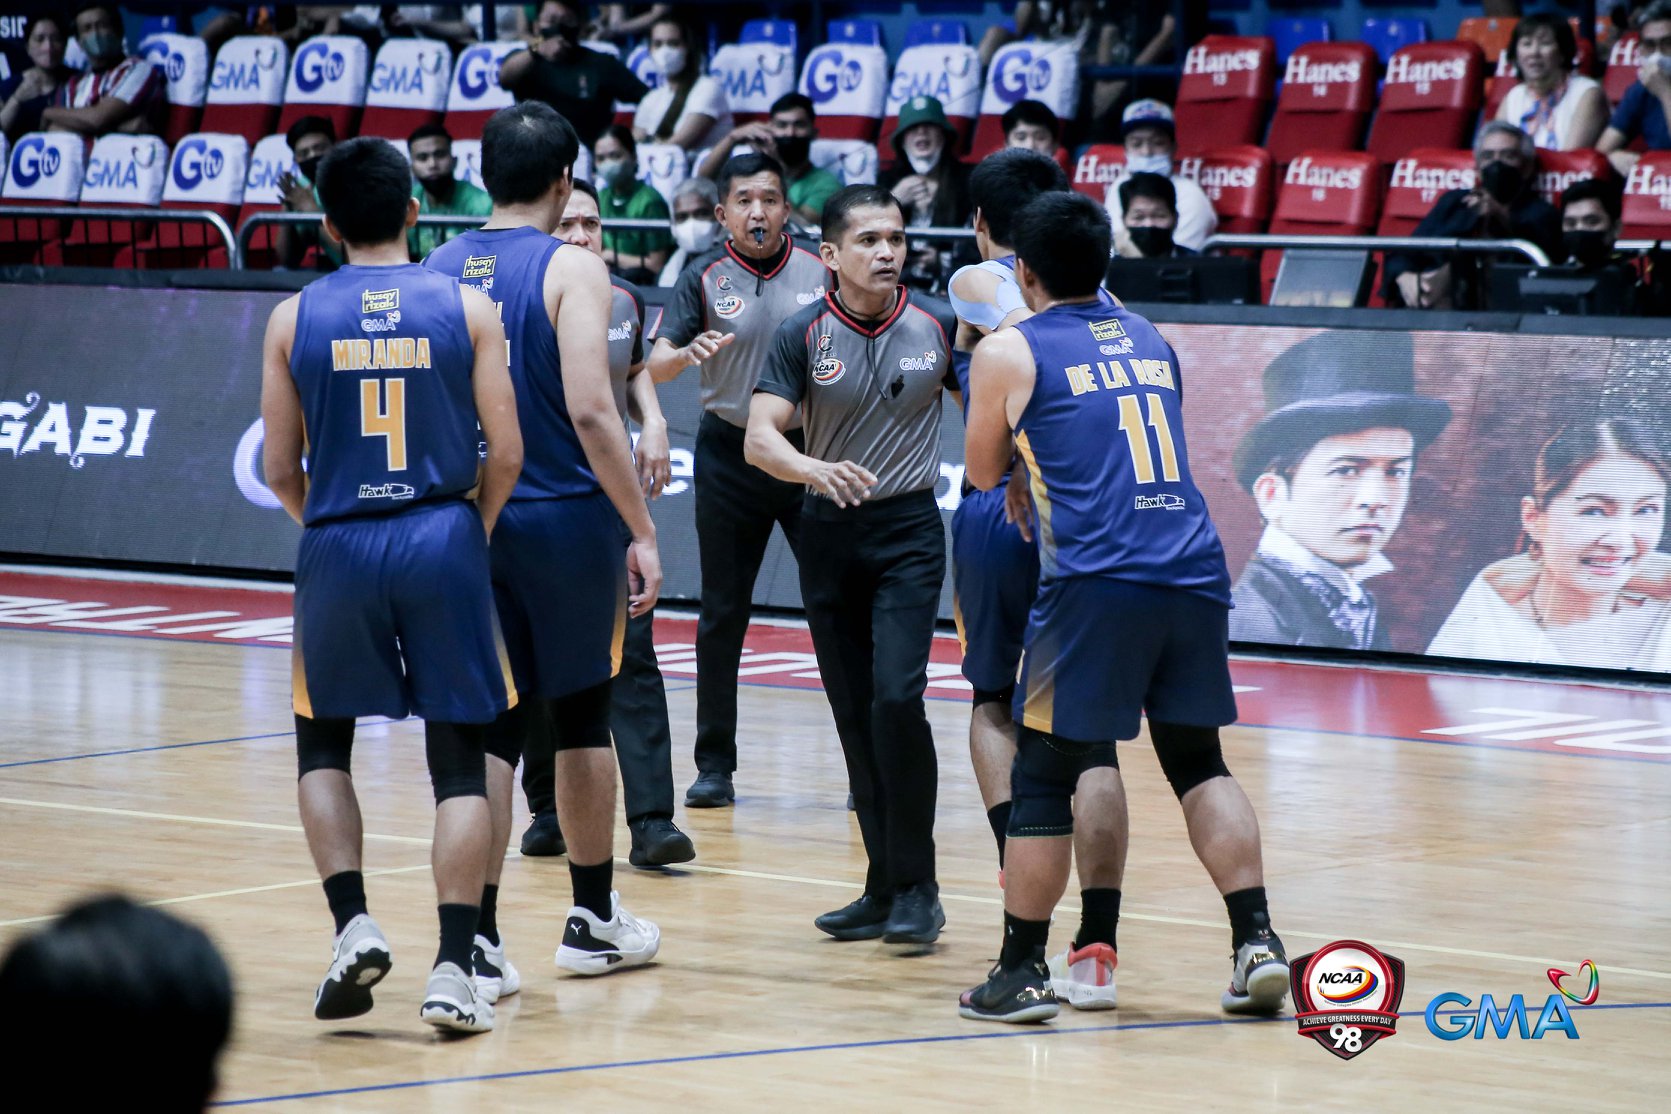 JRU's John Amores trying to confront a referee.